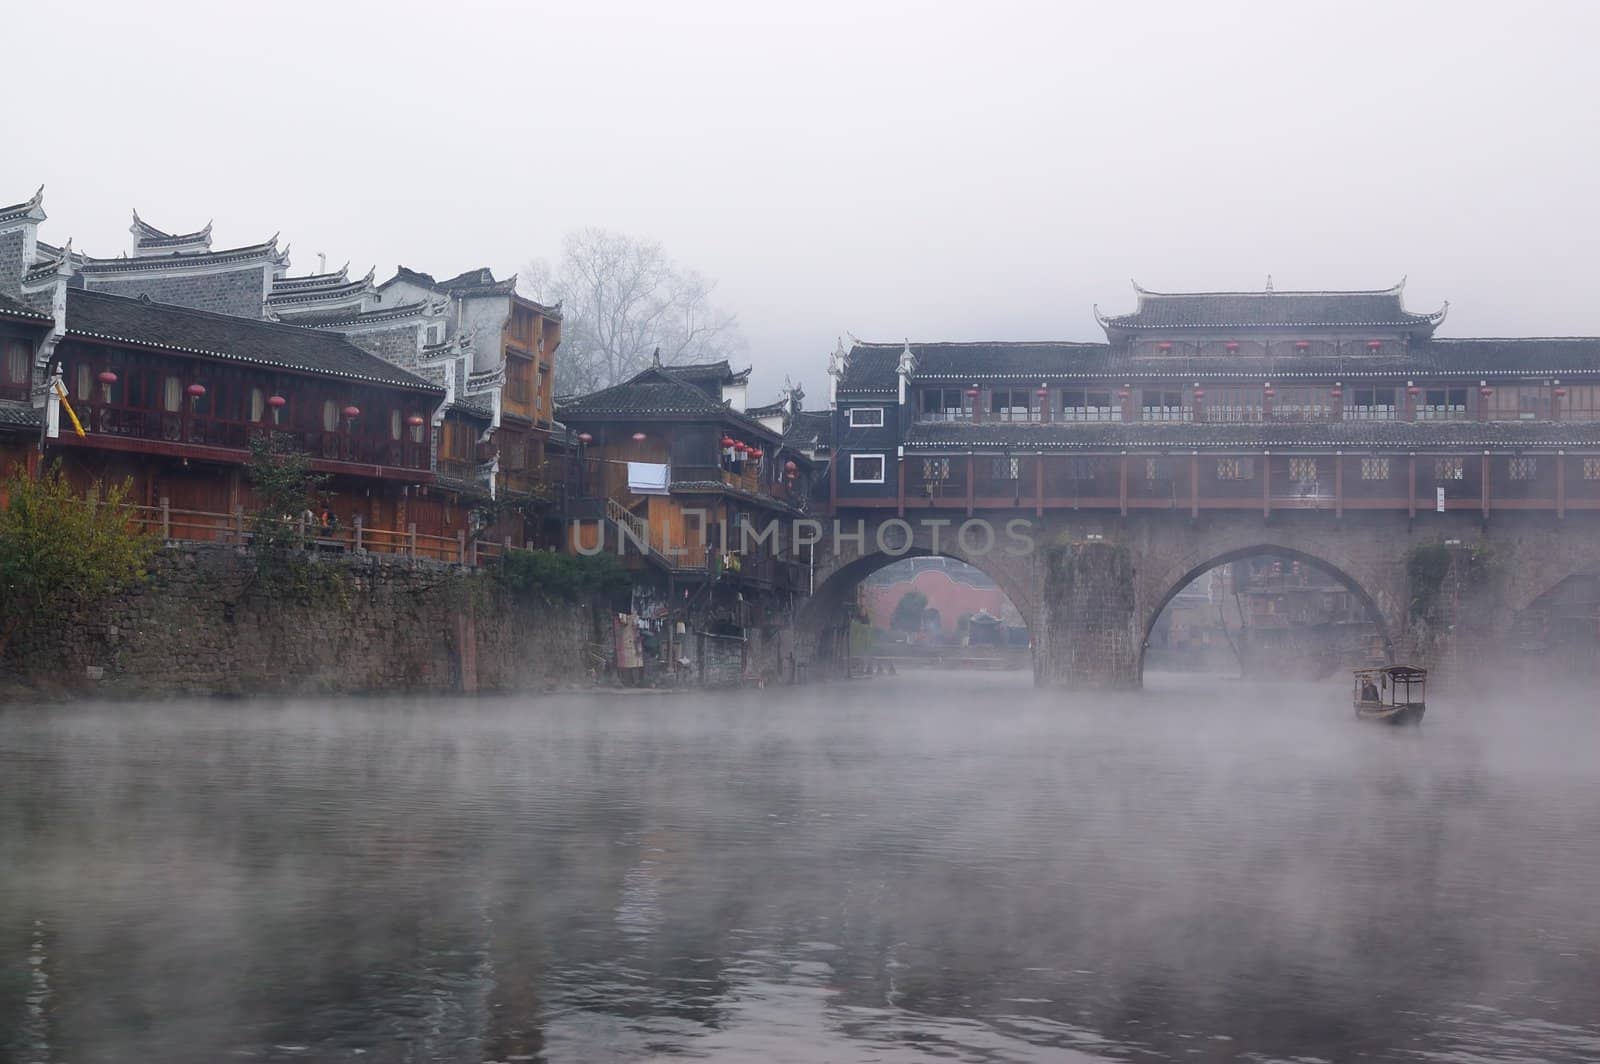 China river landscape with boat, bridge and ancient building in Fenghuang county, Hunan province, China